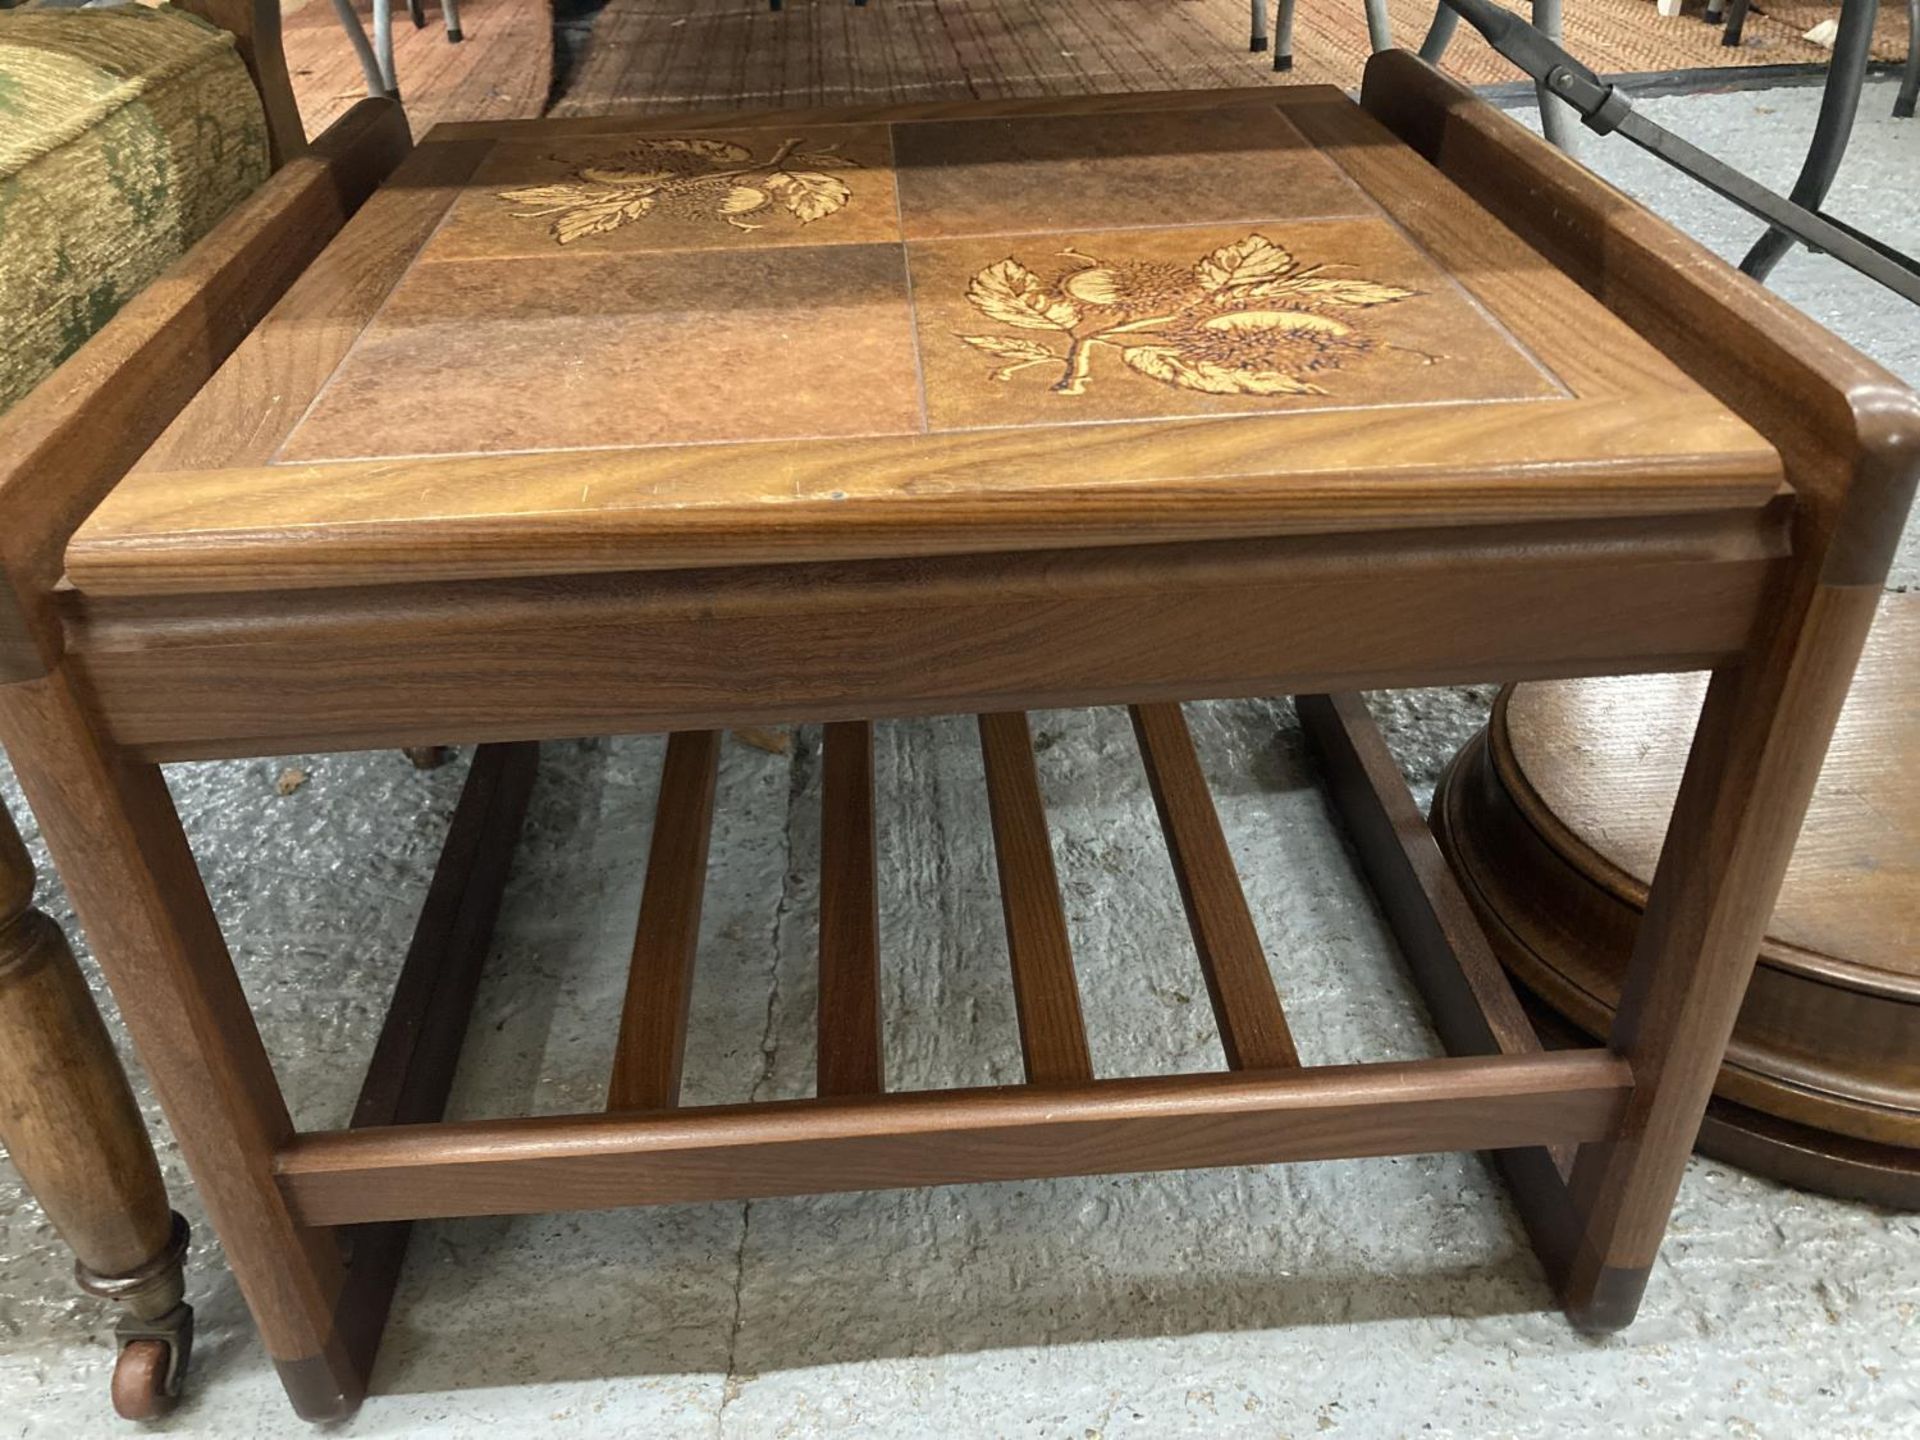 A RETRO STYLE TEAK SIDE TABLE WITH TILE TOP HEIGHT 43CM, WIDTH 56CM, DEPTH 49CM - Image 2 of 3